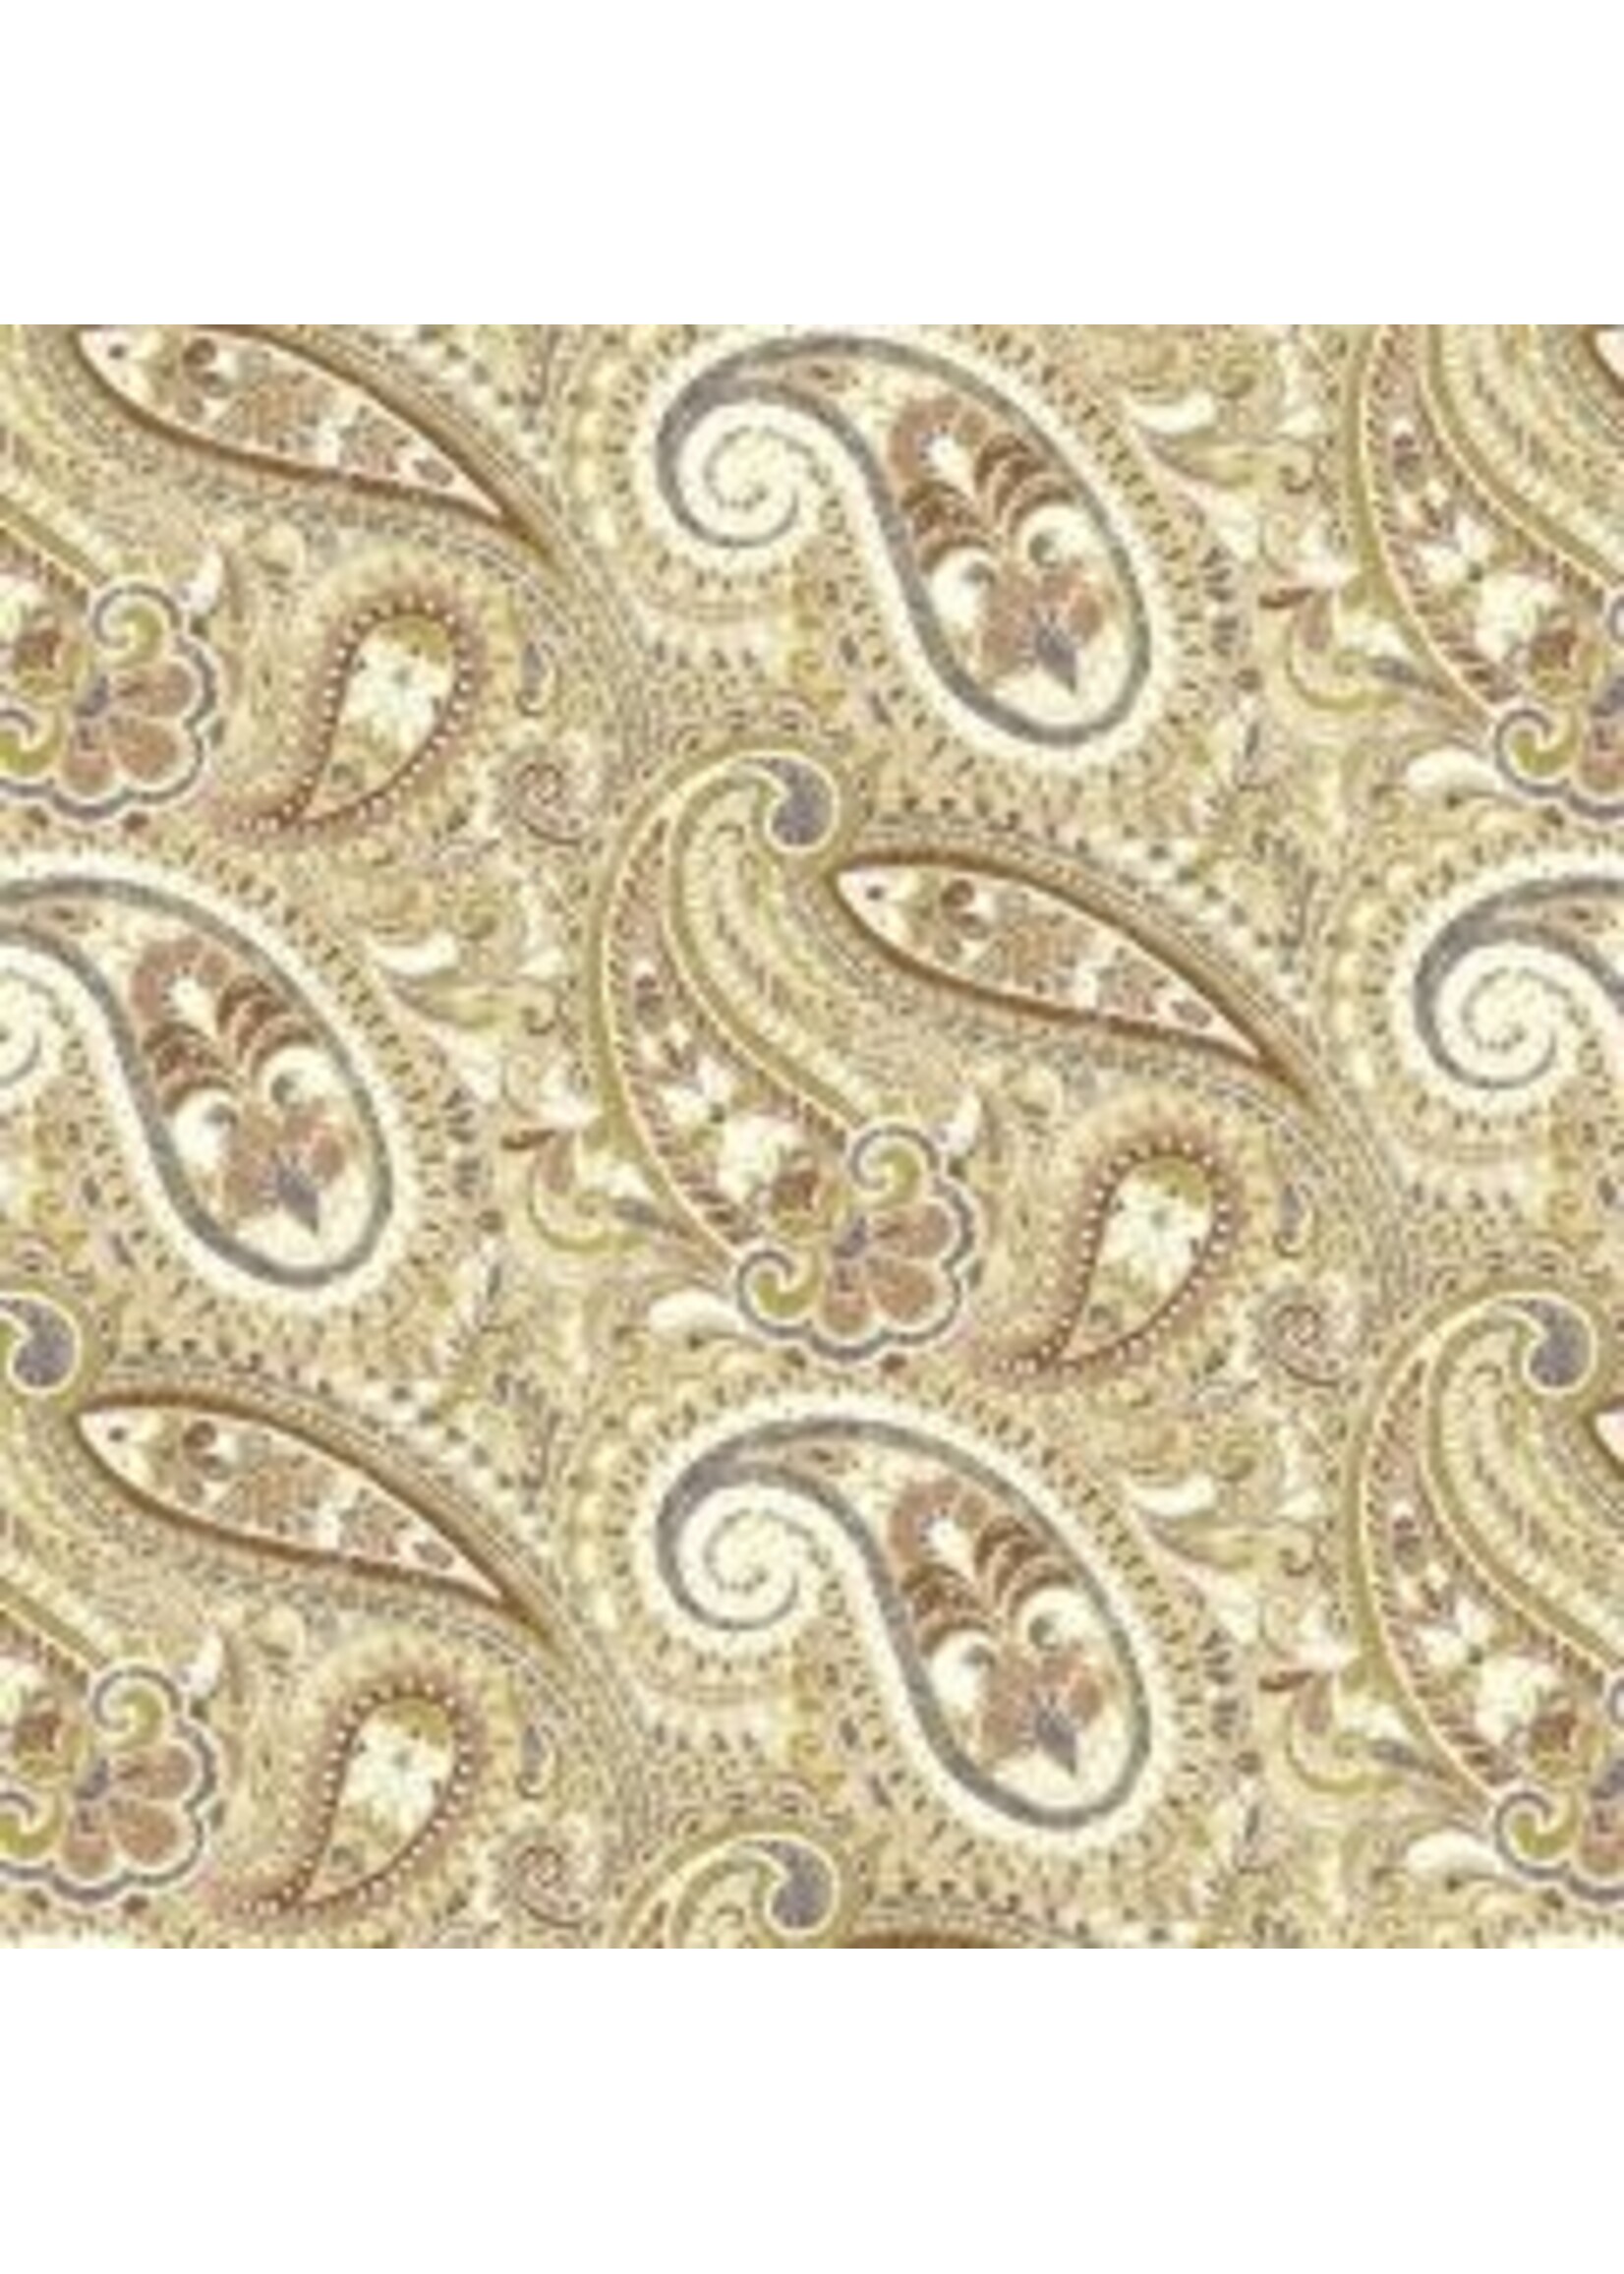 Blank Quilting Shelby - Paisley - Beige - Coupon - 120 cm x 275 cm